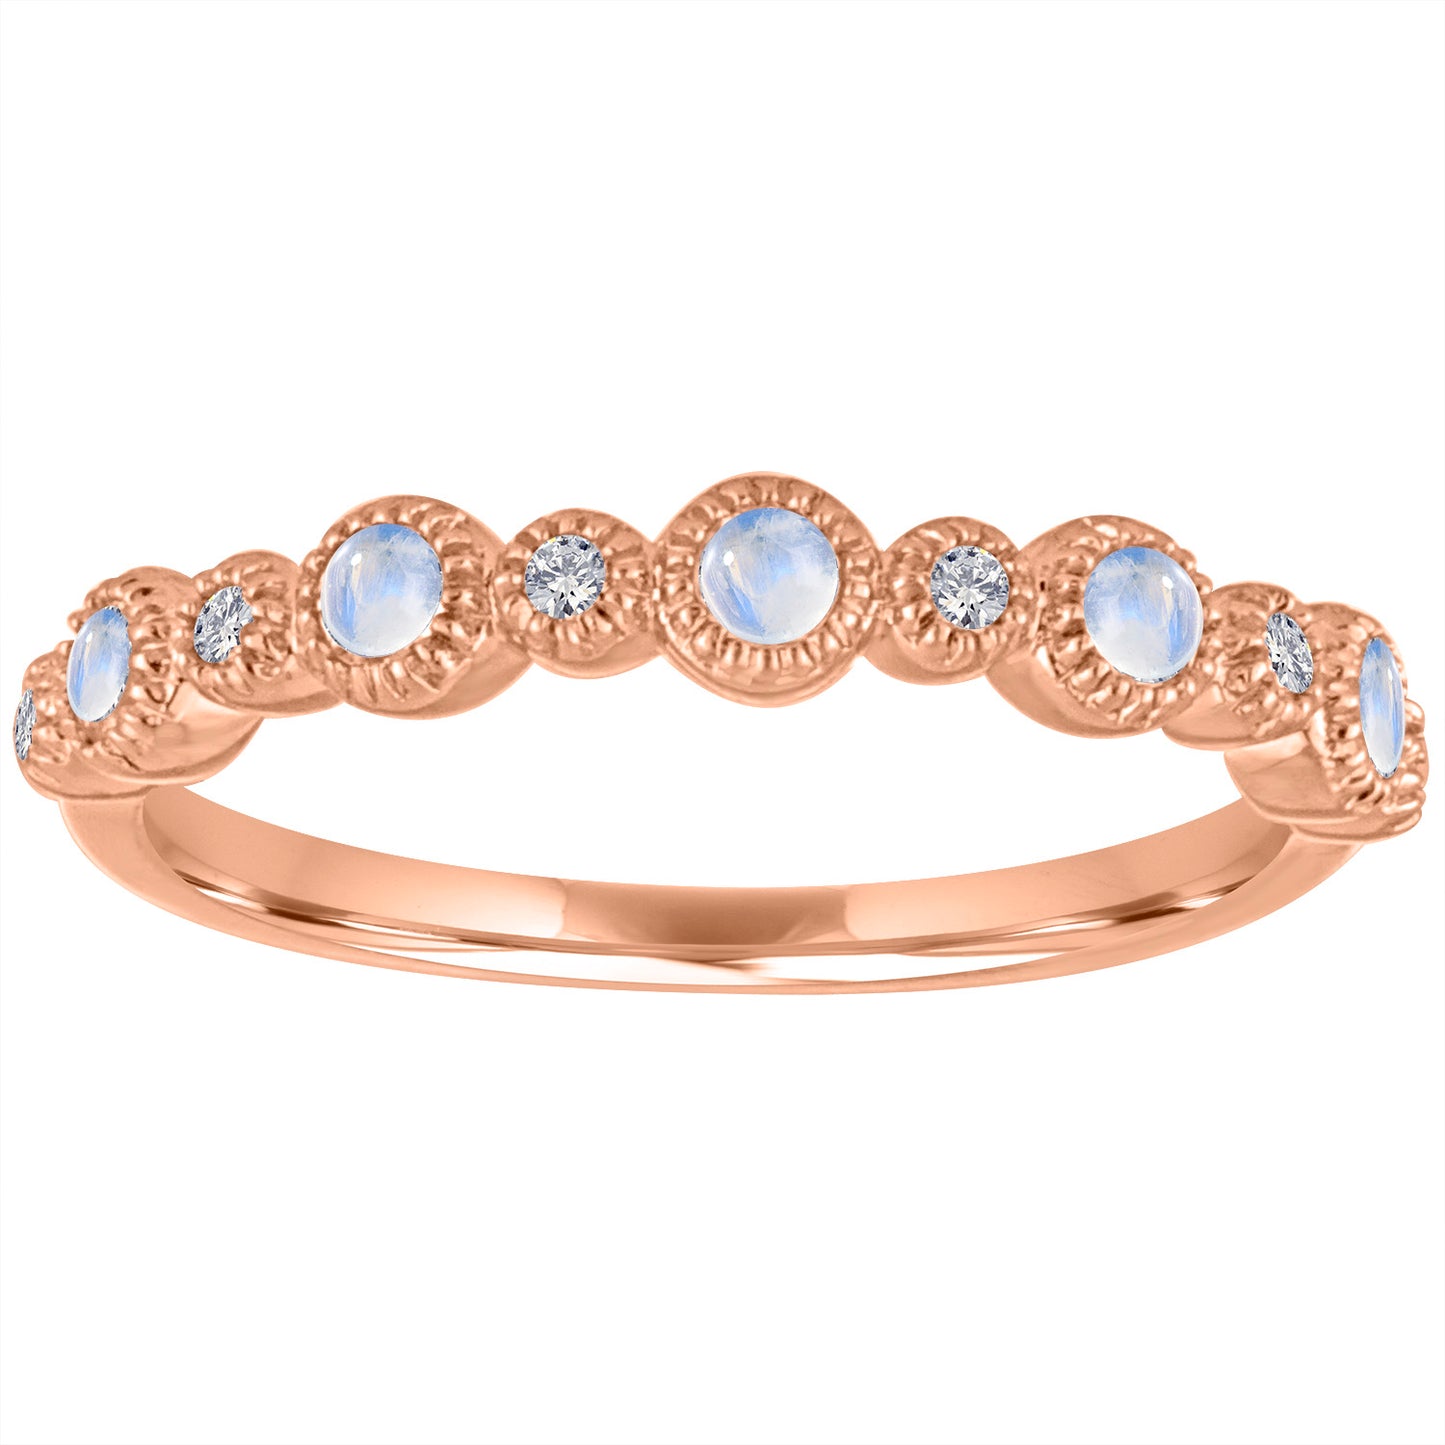 Rose gold skinny band with large round moonstones and small round diamonds.